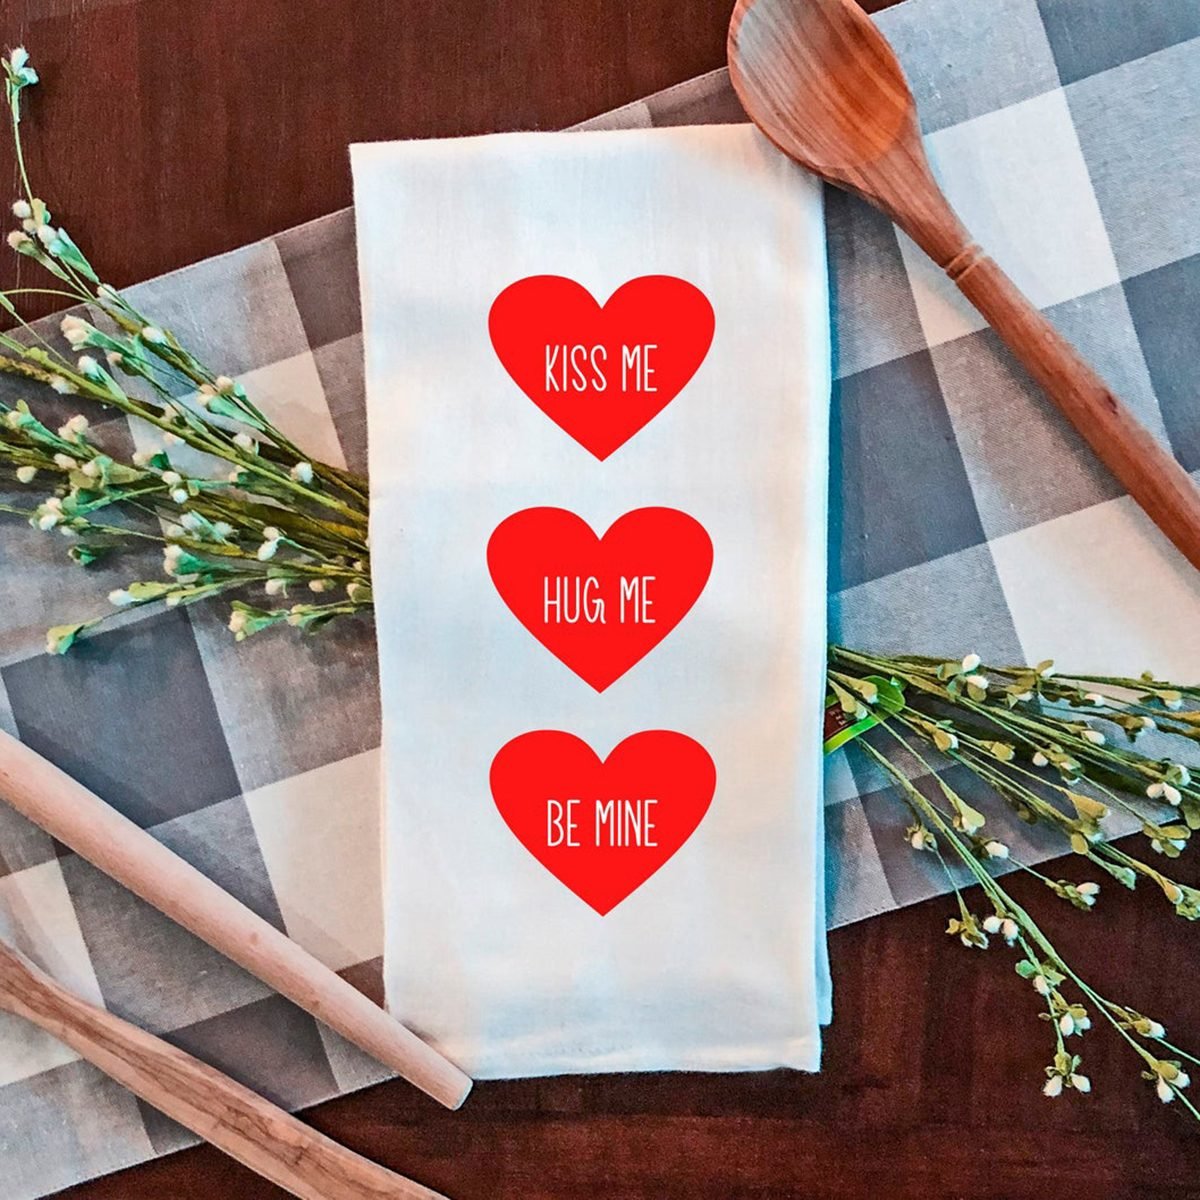 Personalized Gift Valentine's Day Gift Valentine's Tea Towel Personalized Hearts Design Tea Towel Personalized Valentine's Day